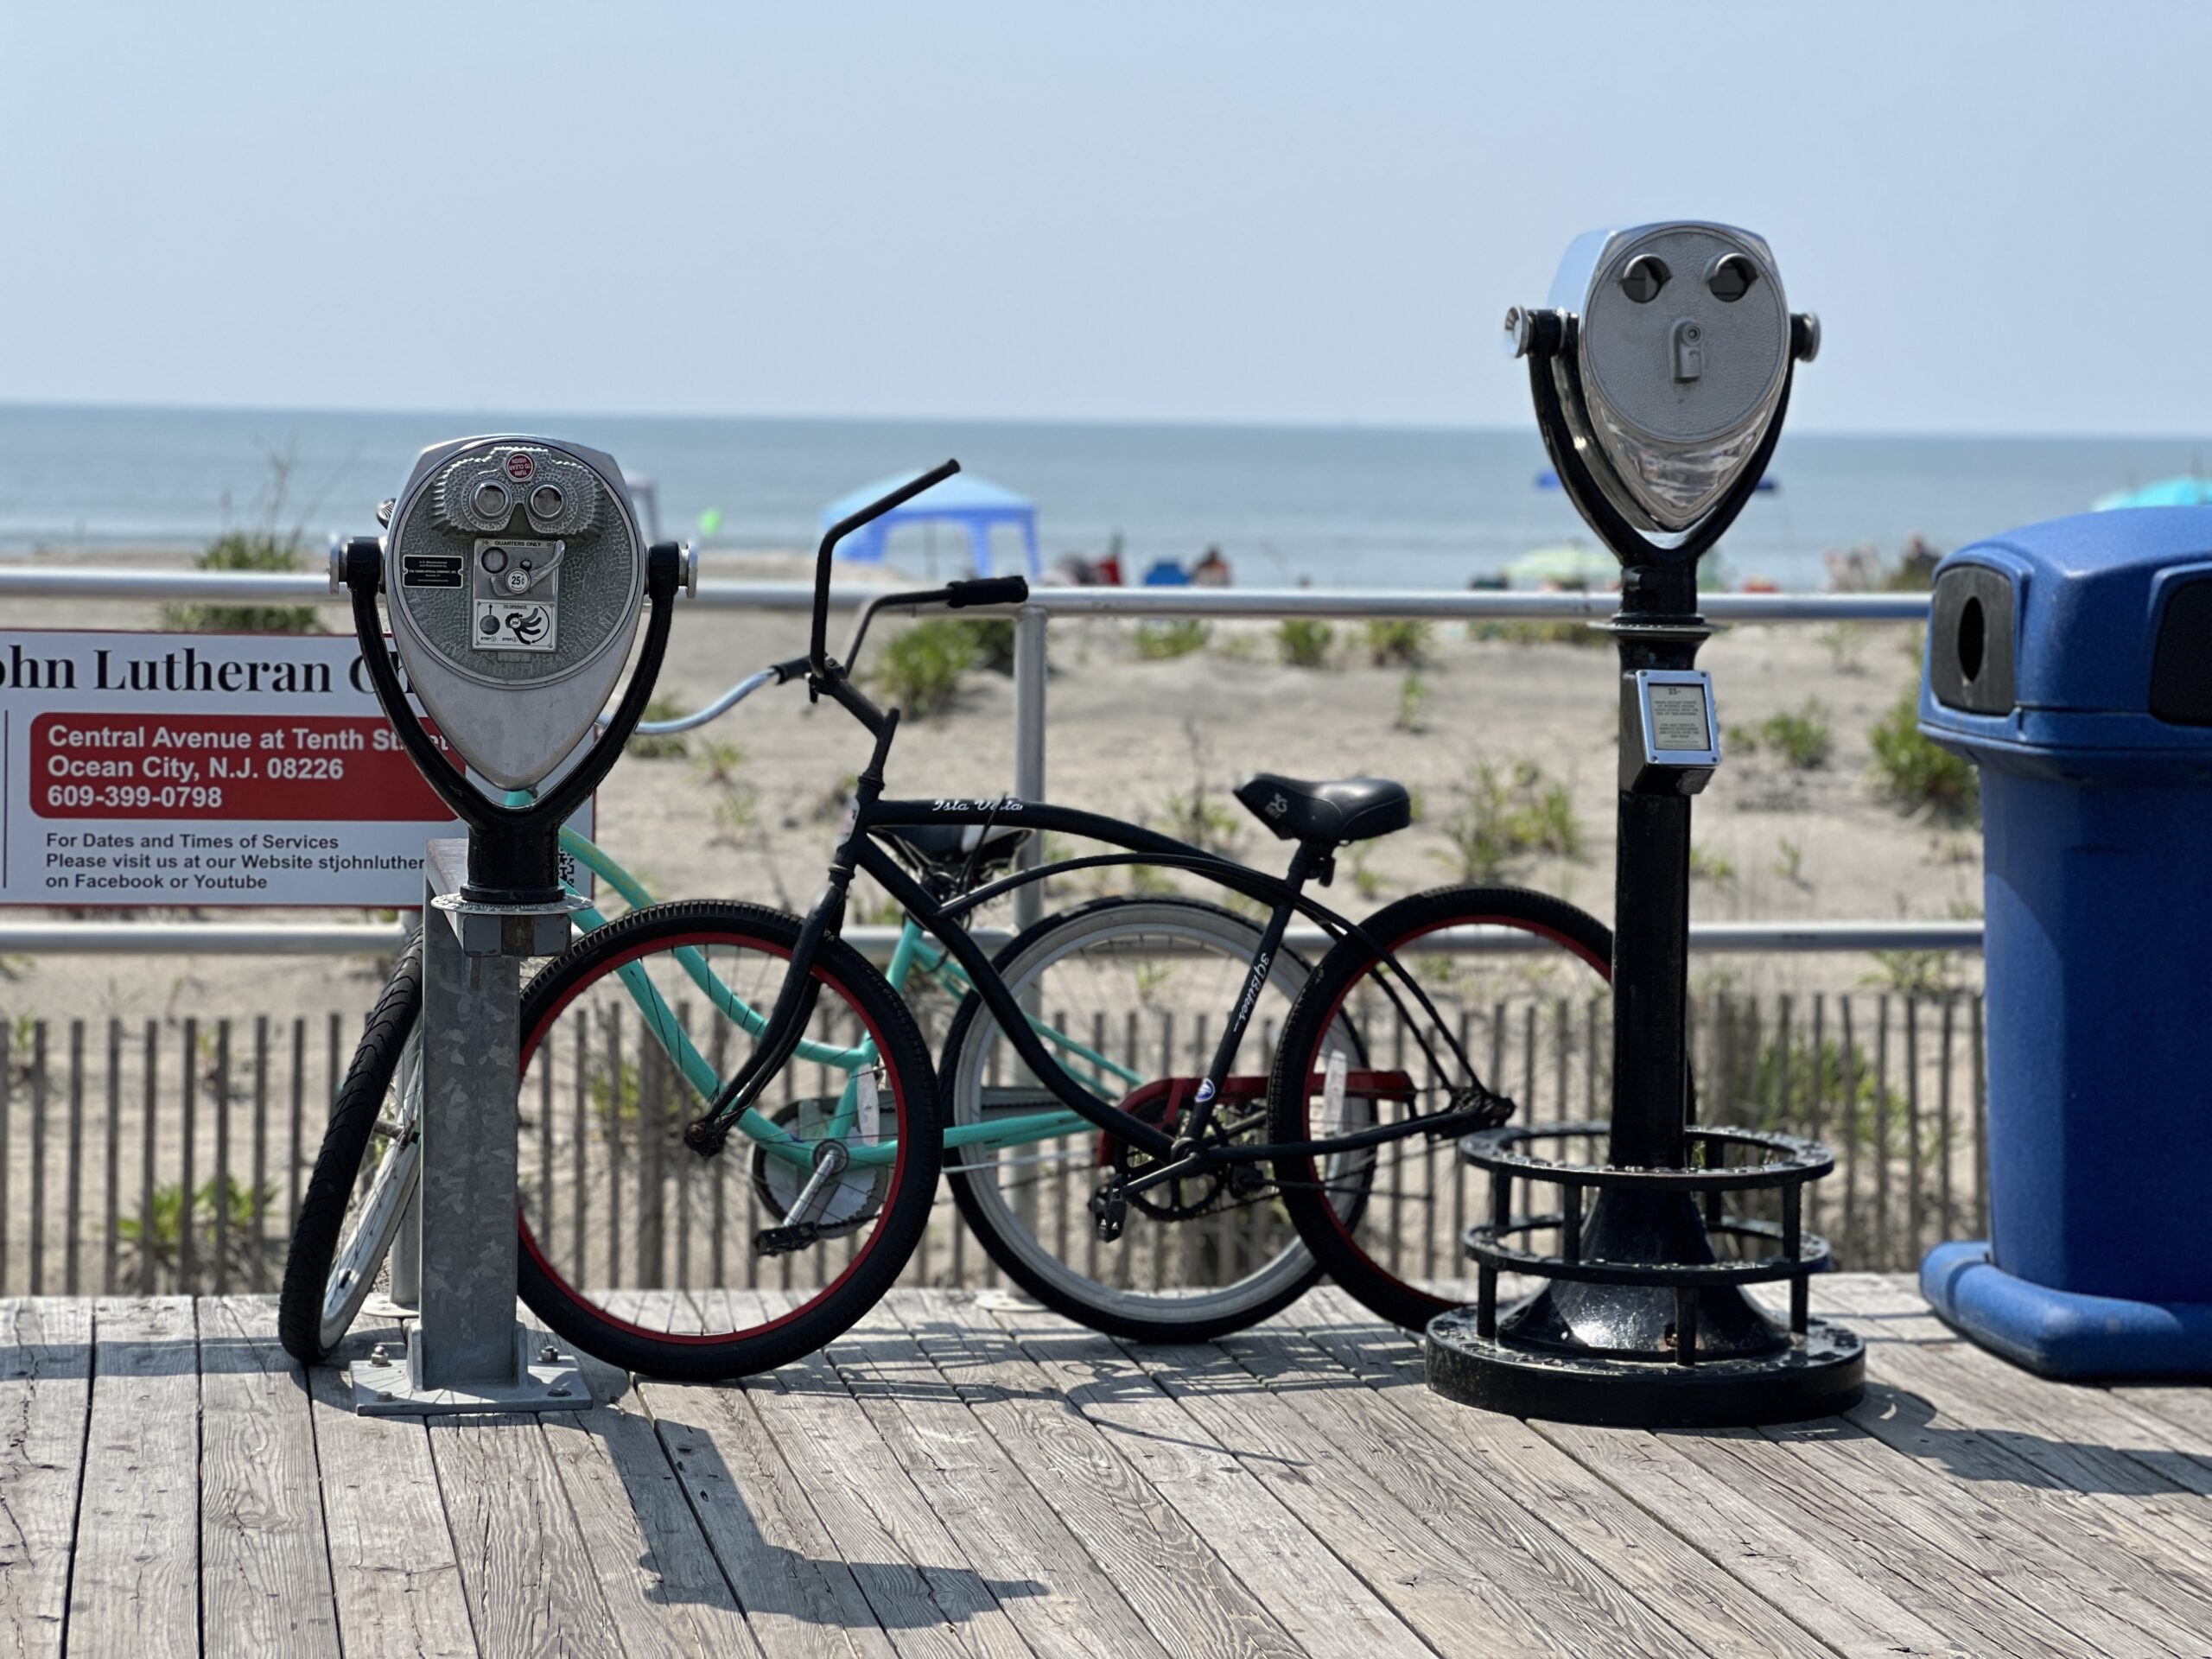 Ocean City boardwalk with viewfinders and bikes